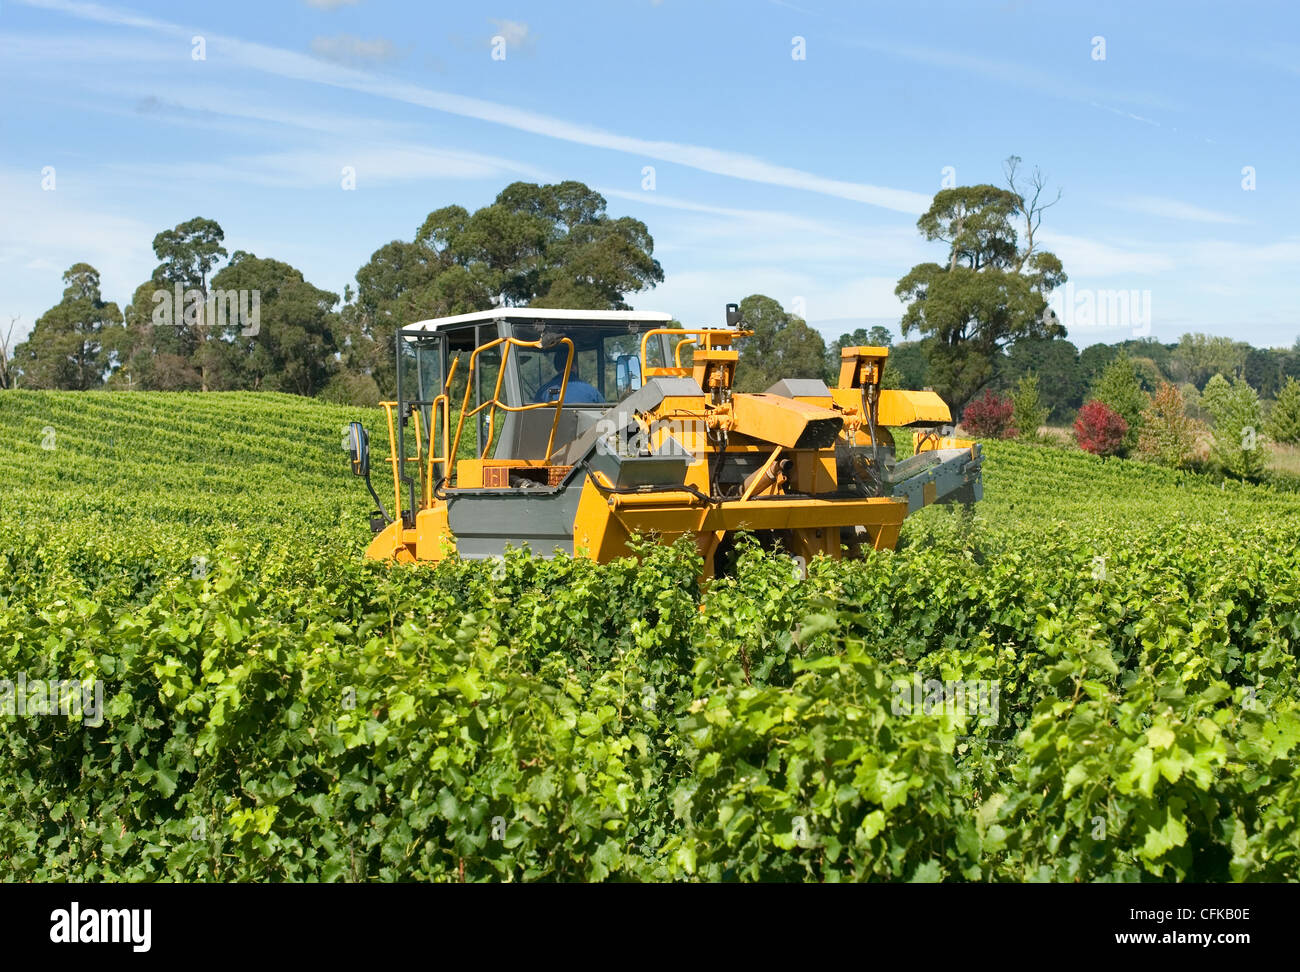 Harvesting Grapes in a vineyard near Sutton Forest, on the Southern Highlands of New South Wales, Australia Stock Photo